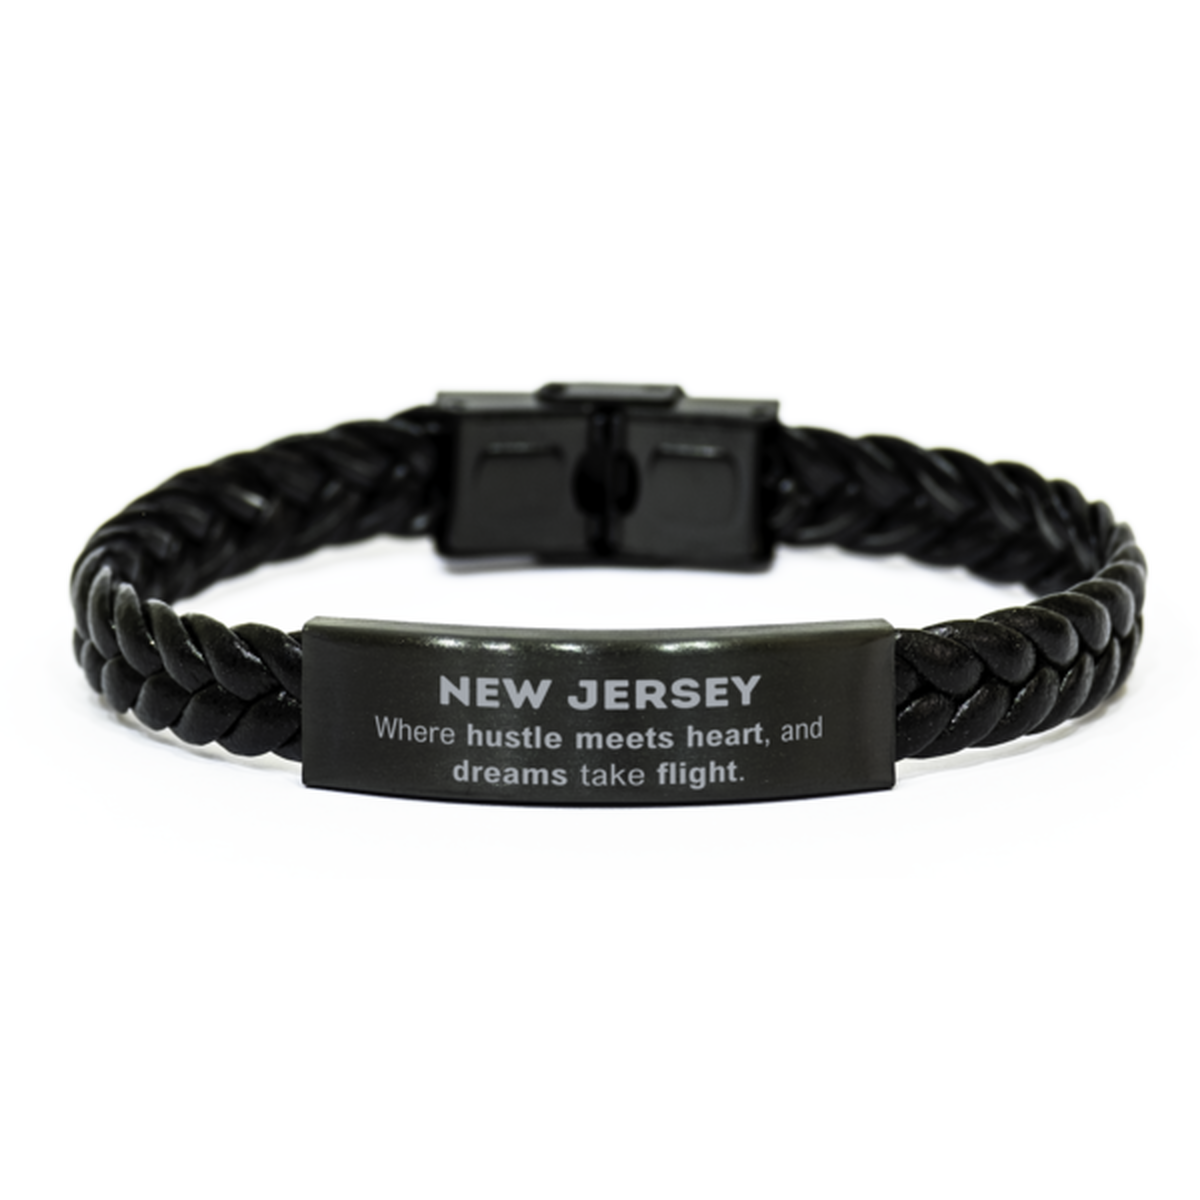 New Jersey: Where hustle meets heart, and dreams take flight, New Jersey Gifts, Proud New Jersey Christmas Birthday New Jersey Braided Leather Bracelet, New Jersey State People, Men, Women, Friends